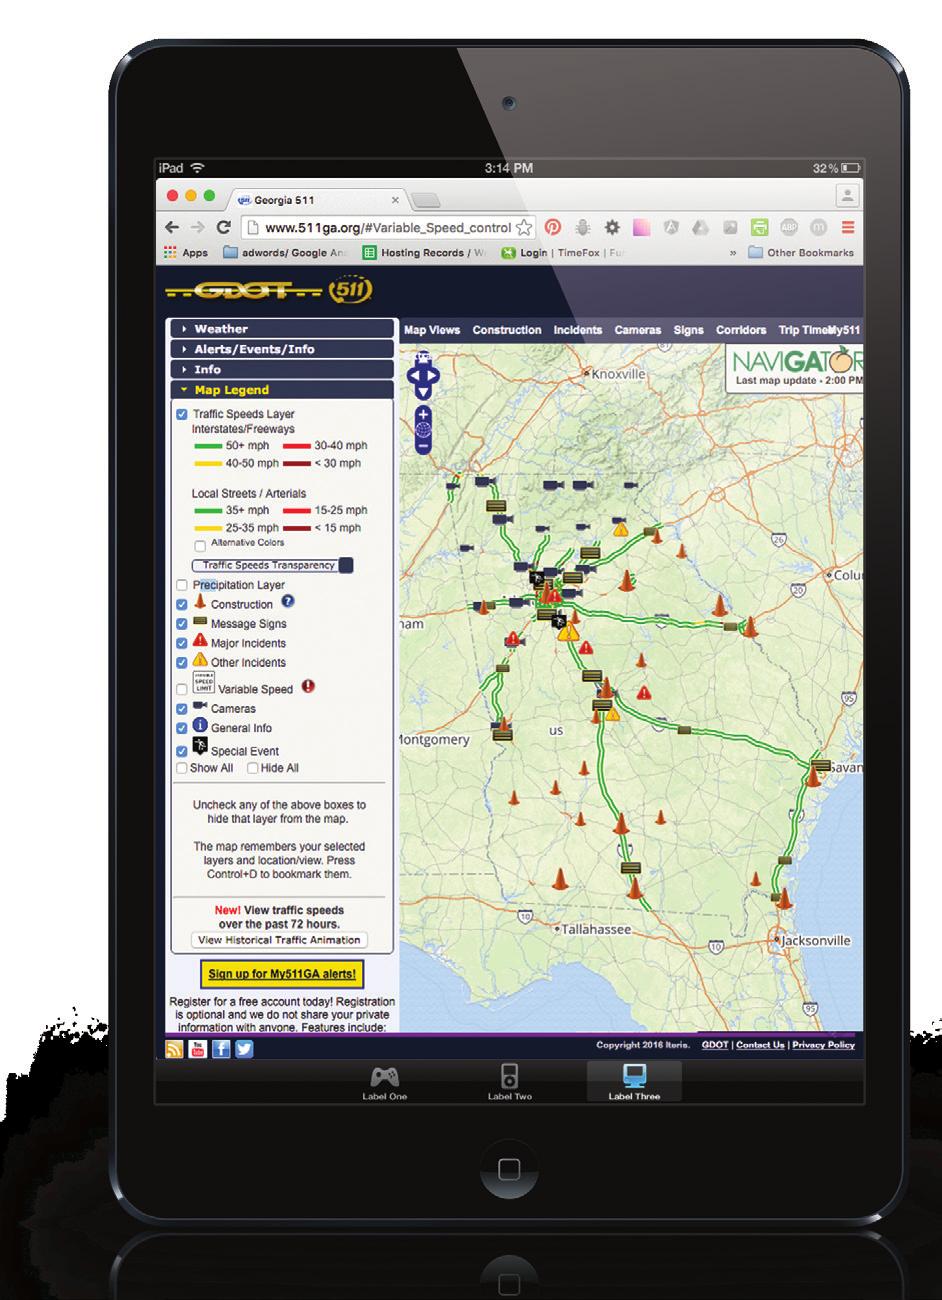 Taken together, GDOT s technology solutions ensure a level of situational awareness that was previously unattainable.